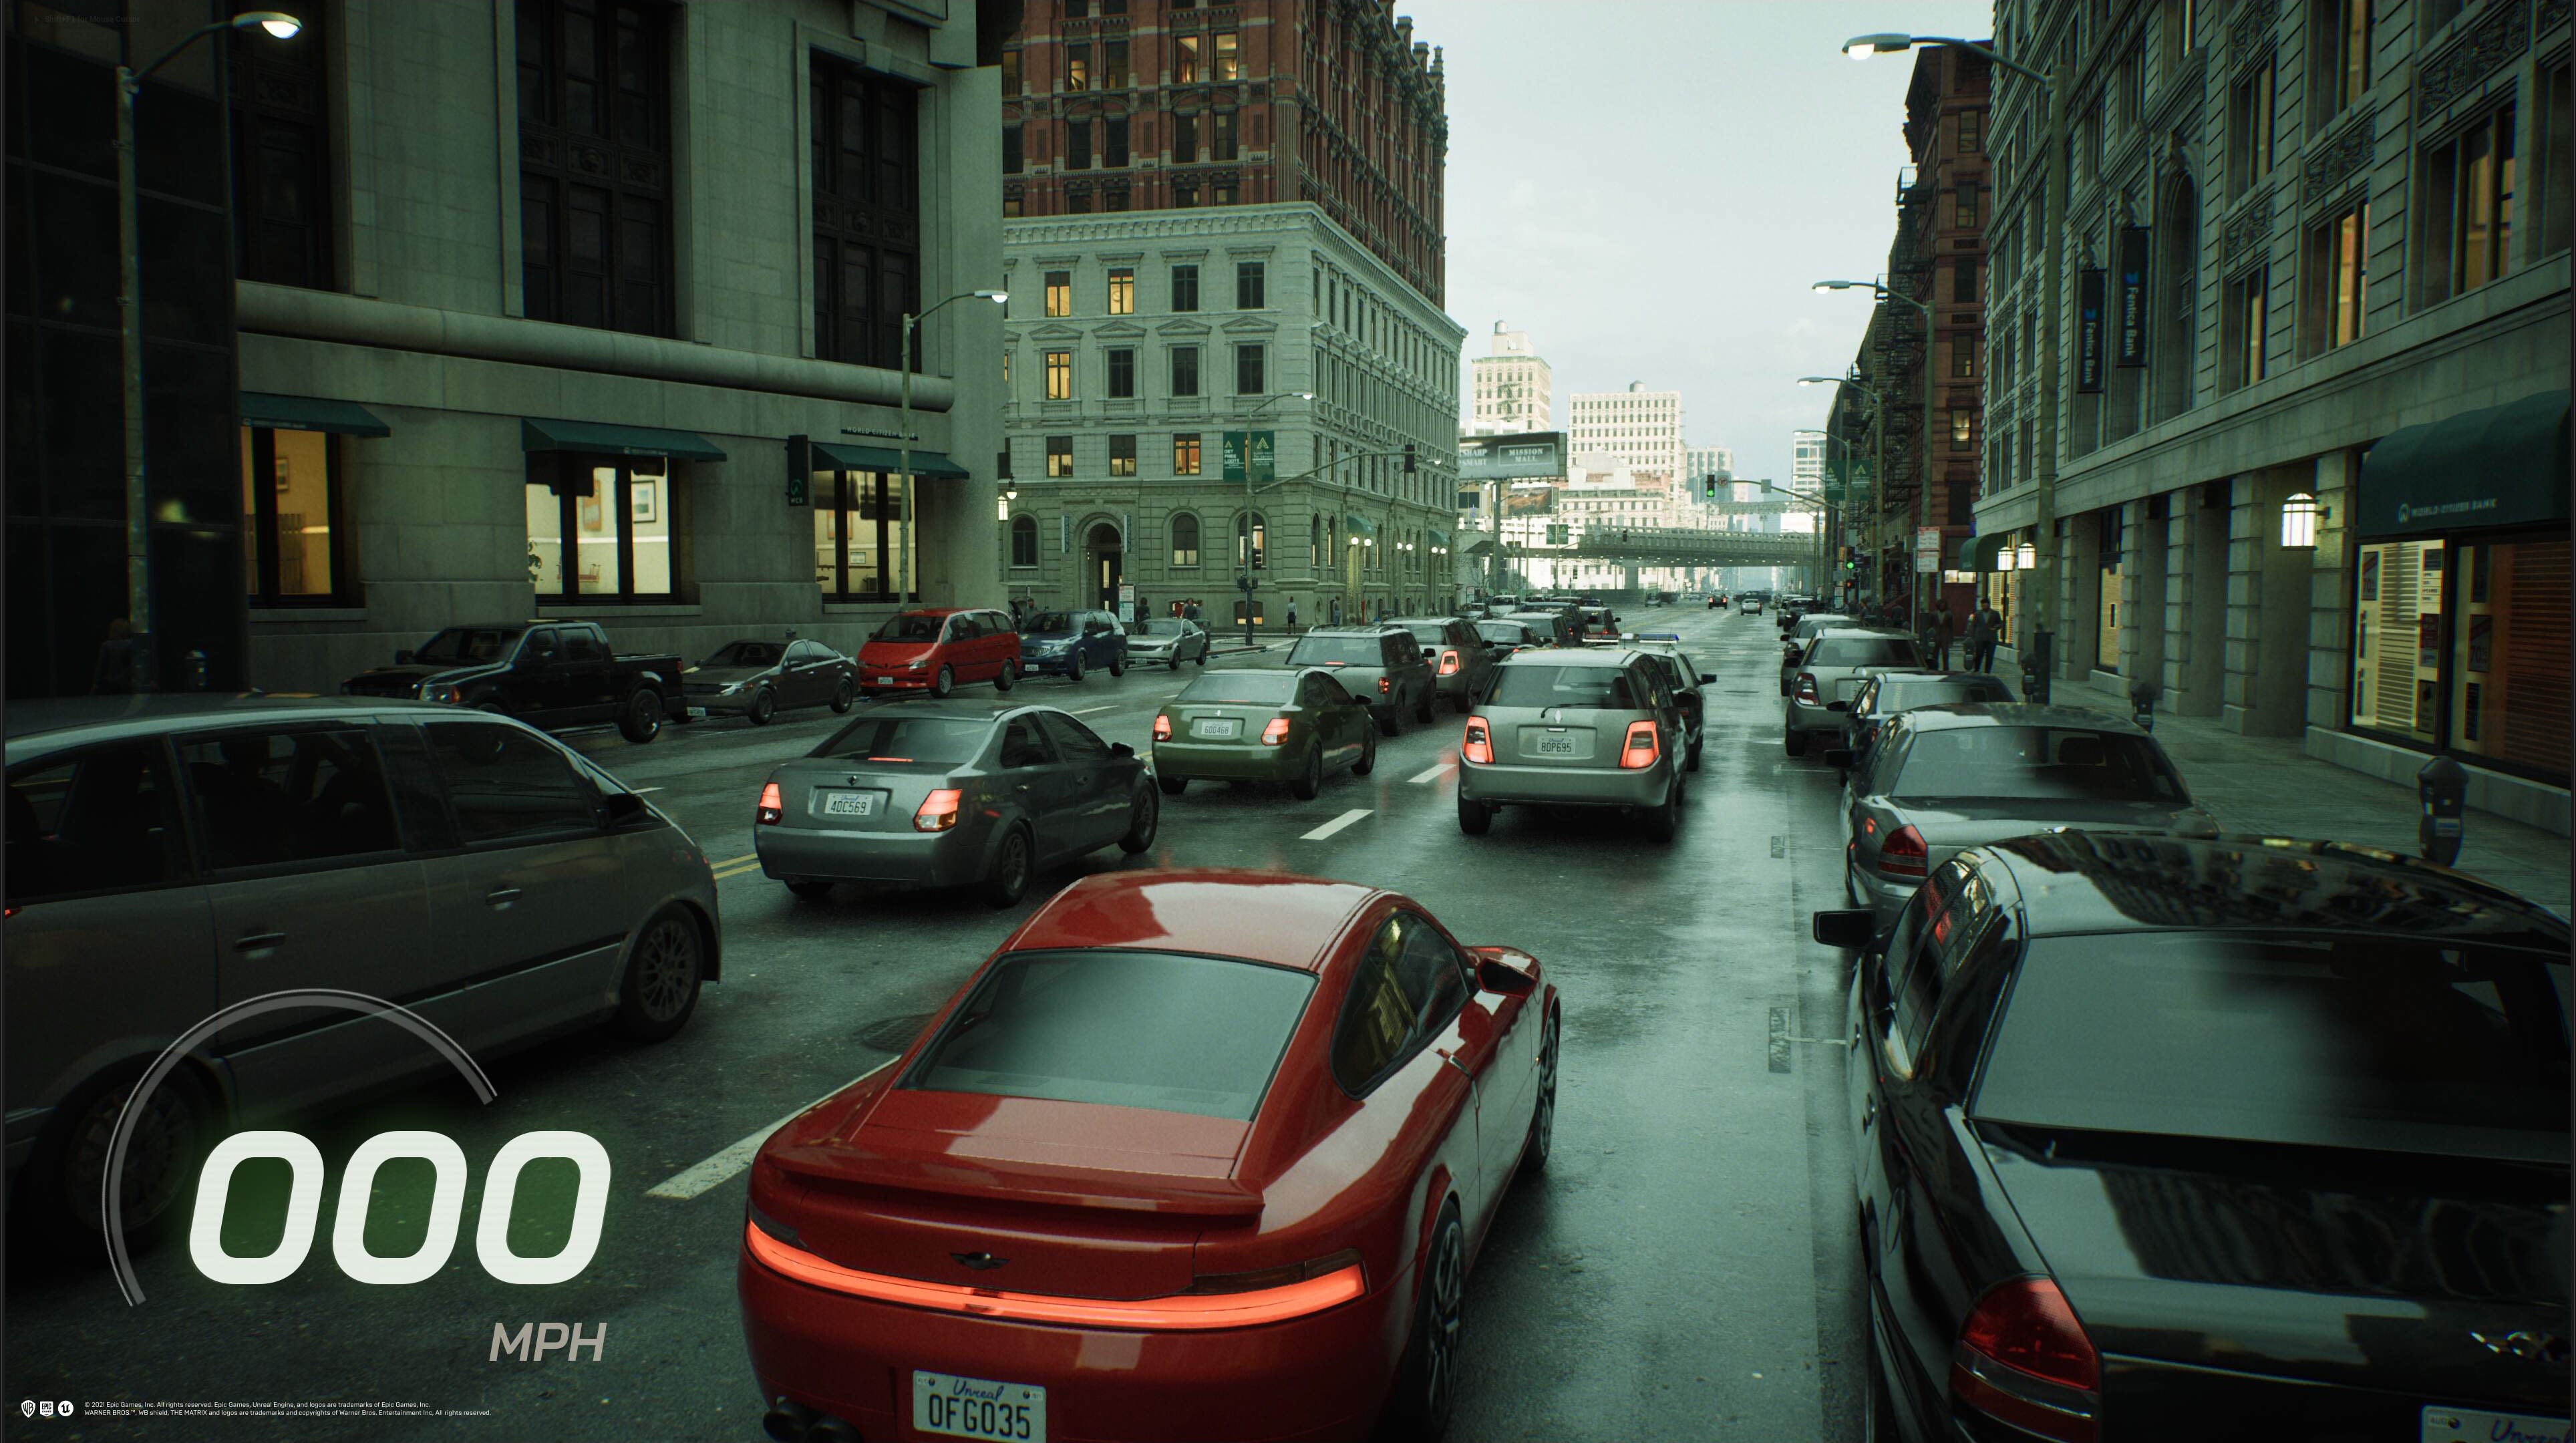 Image for Unreal Engine 5 Matrix City Sample PC Analysis: The Cost of Next-Gen Rendering